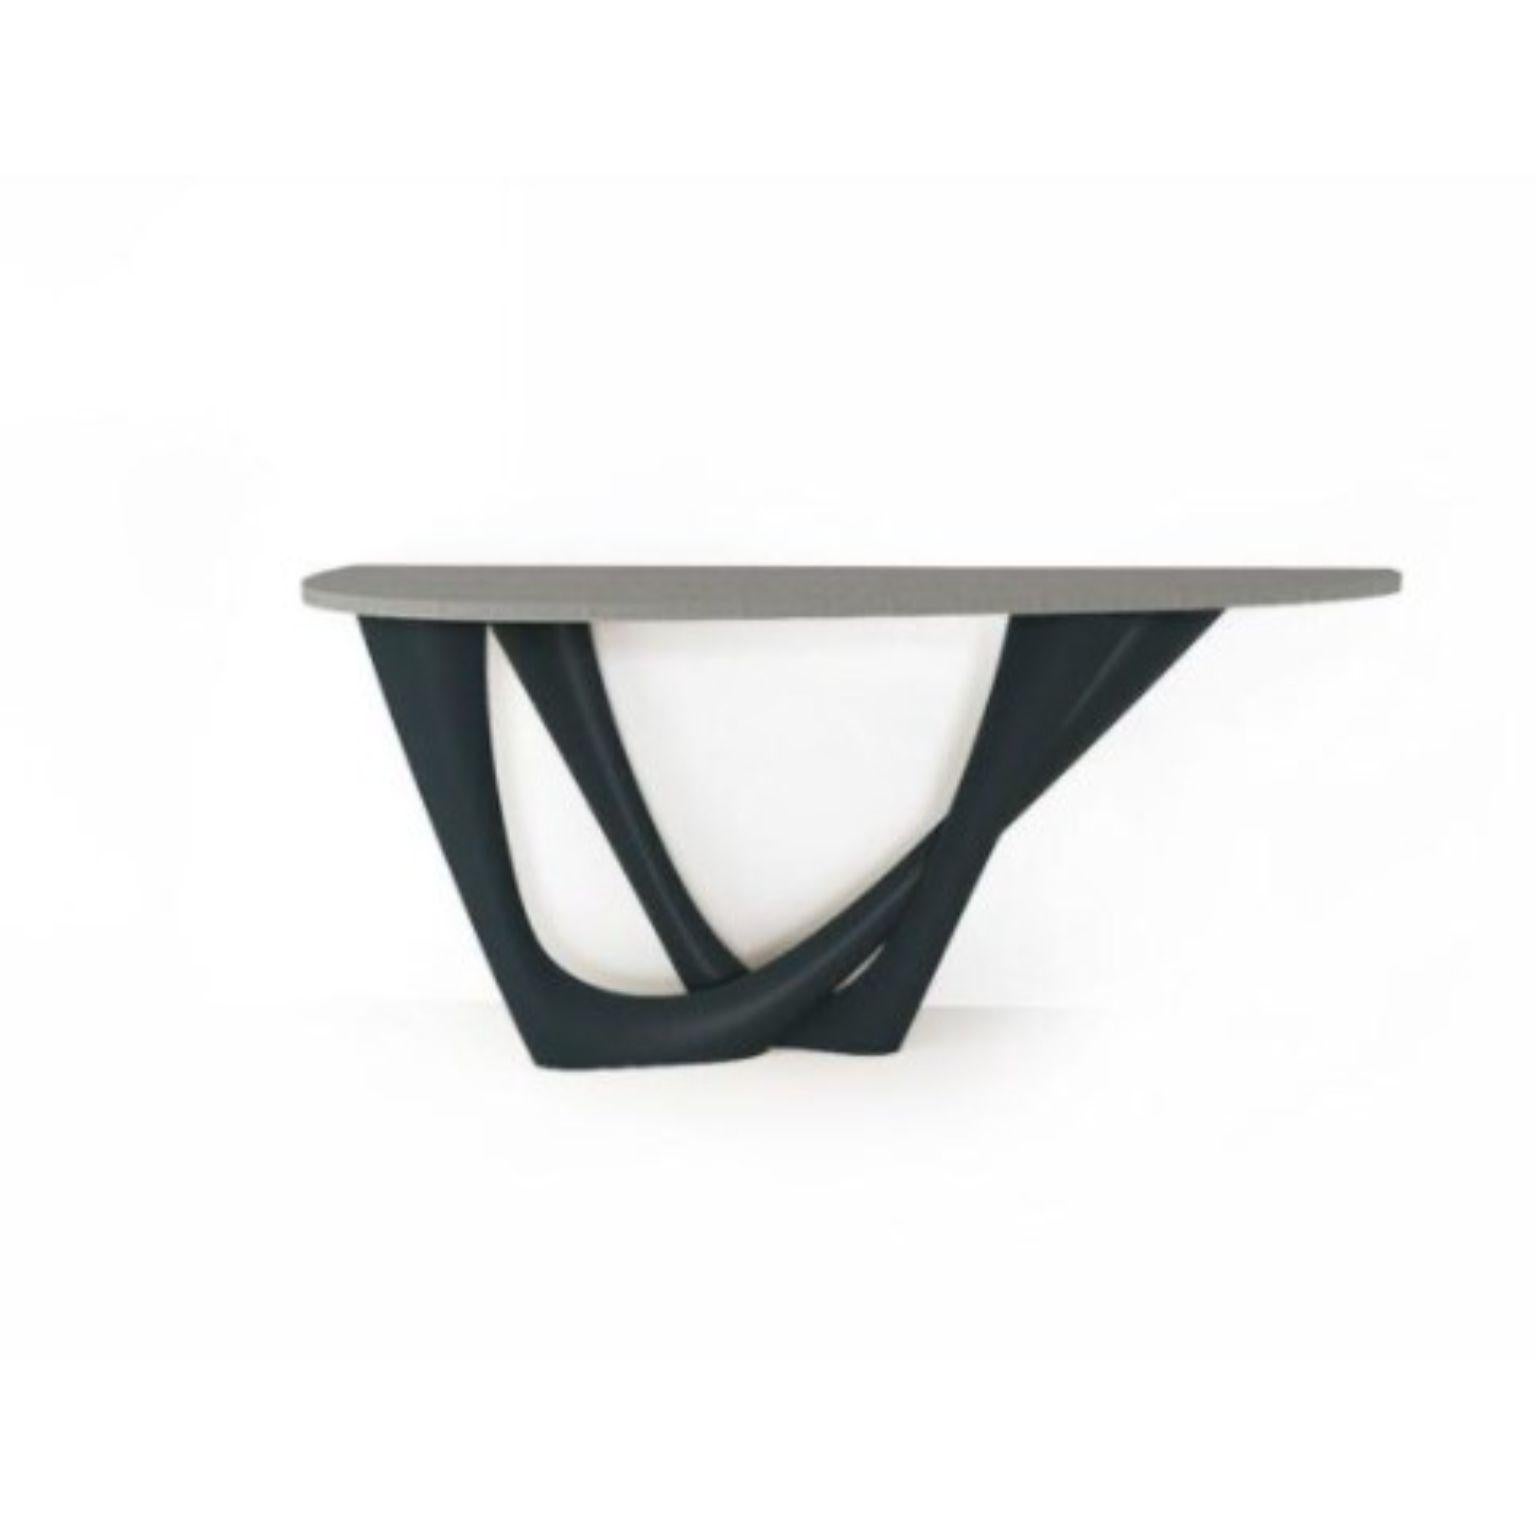 Grey Blue G-Console Duo concrete top and steel base by Zieta
Dimensions: D 56 x W 168 x H 75 cm 
Material: Carbon steel, concrete.
Also available in different colors and dimensions.

G-Console is another bionic object in our collection. Created for